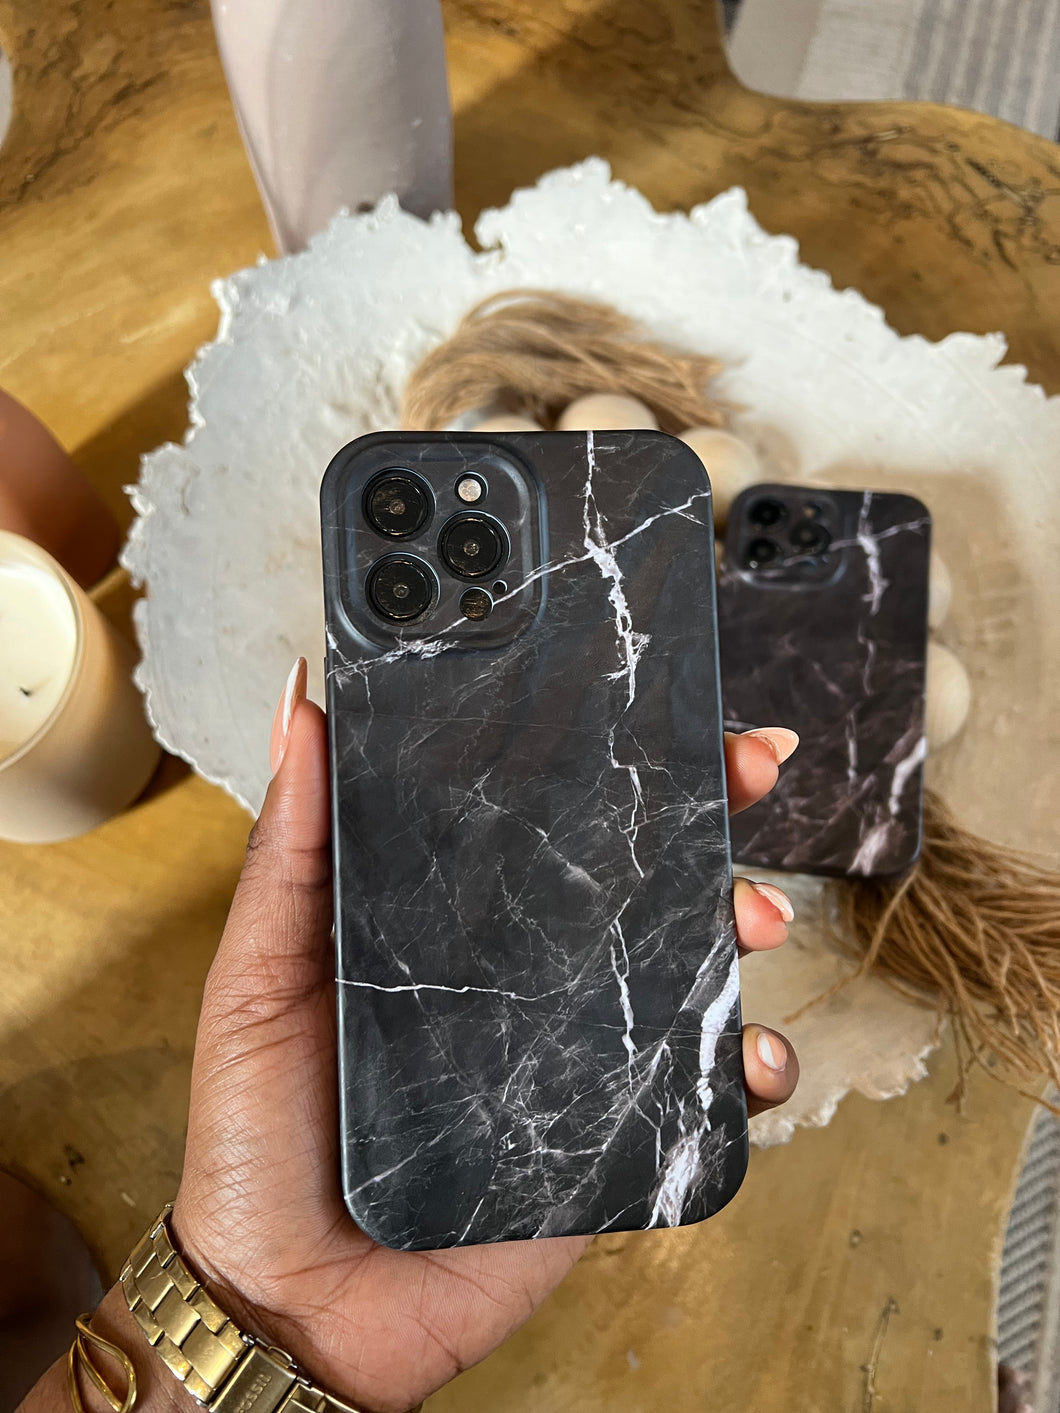 Textured Black marble protective case he